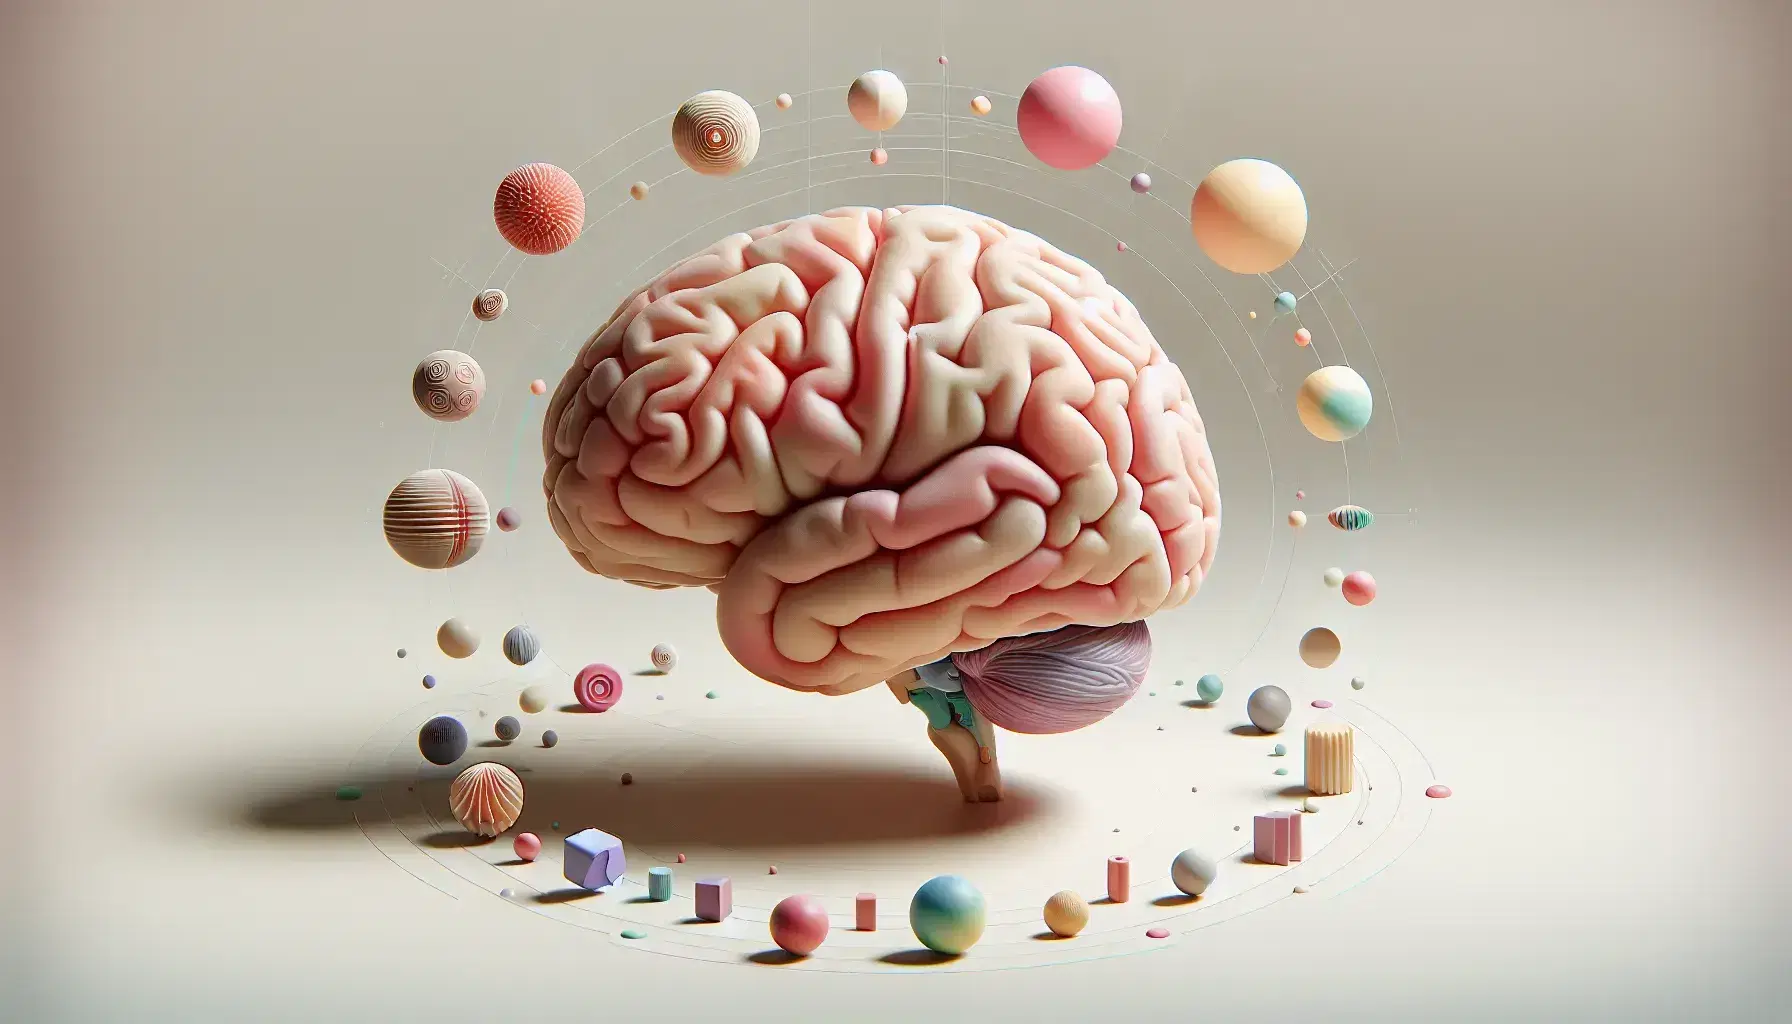 Detailed anatomical model of human brain in lateral view on neutral background with floating translucent colorful geometric shapes.